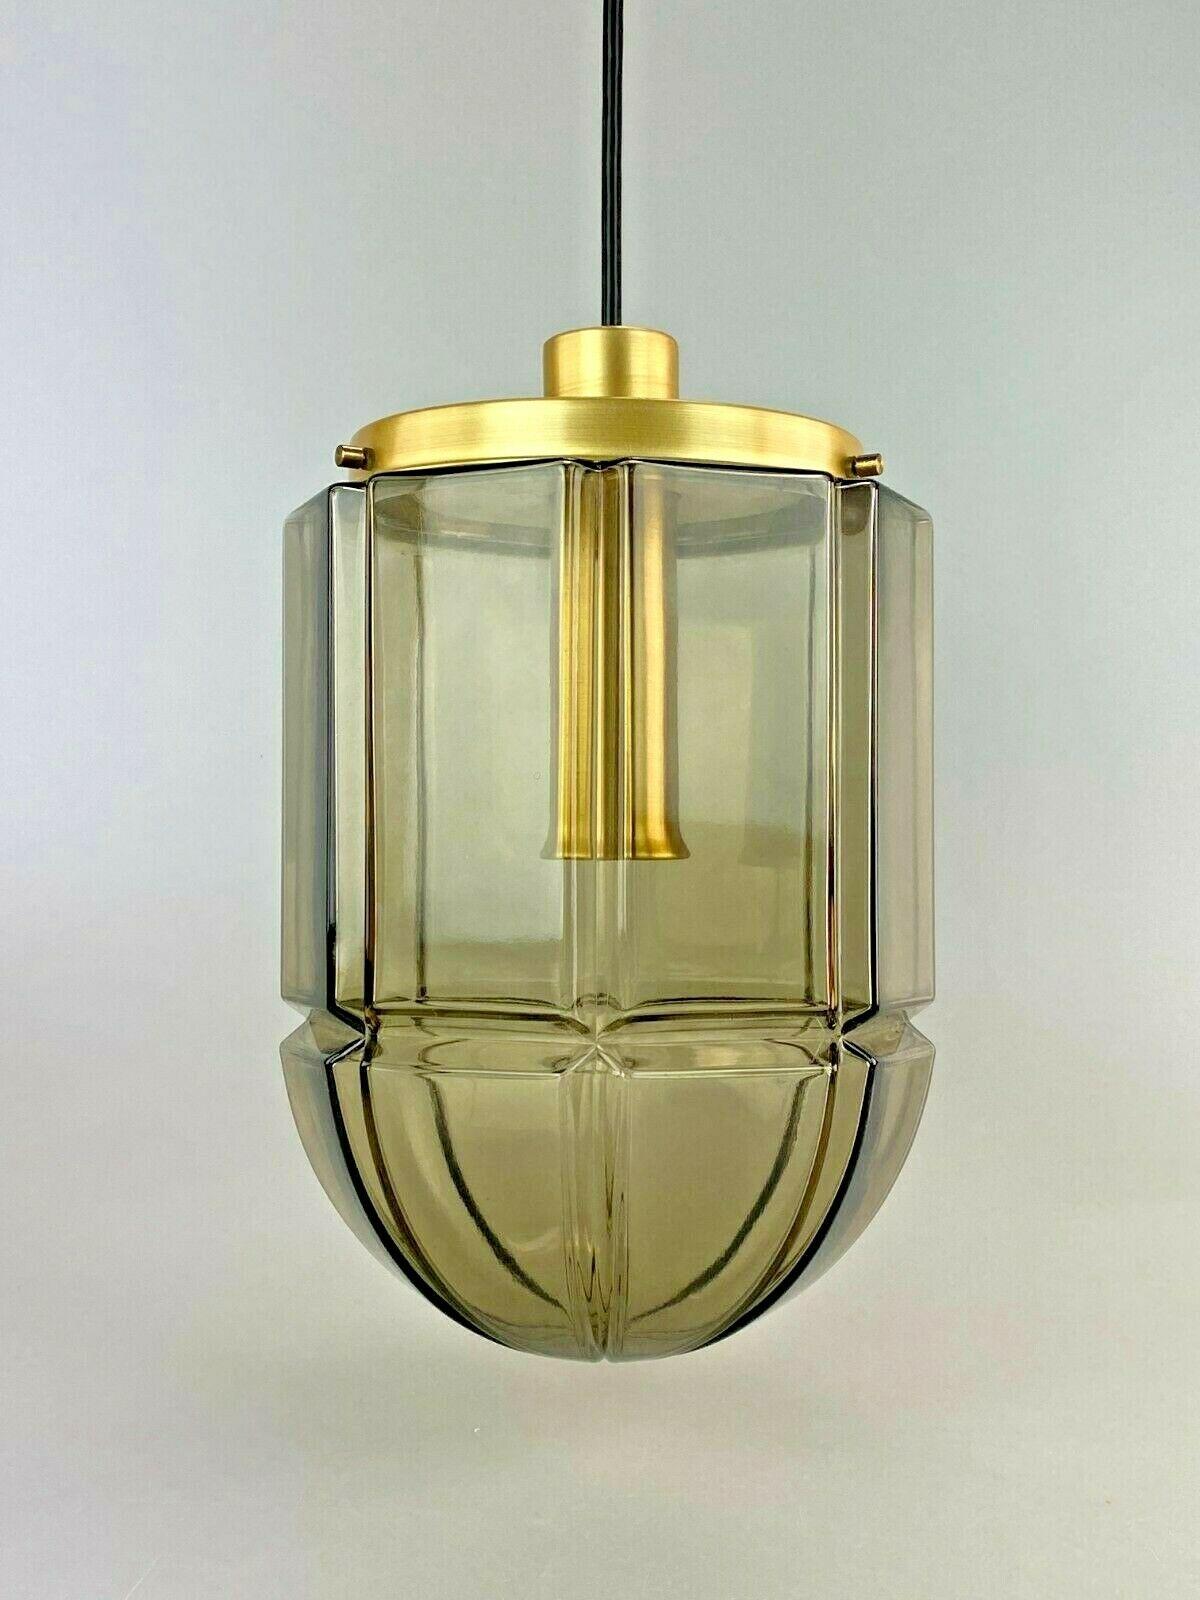 60s 70s Peill & Putzler hanging lamp ceiling lamp glass space design lamp

Object: lamp

Manufacturer: Peill & Putzler

Condition: good

Age: around 1960-1970

Dimensions:

Diameter = 20cm
Height = 32cm

Other notes:

The pictures